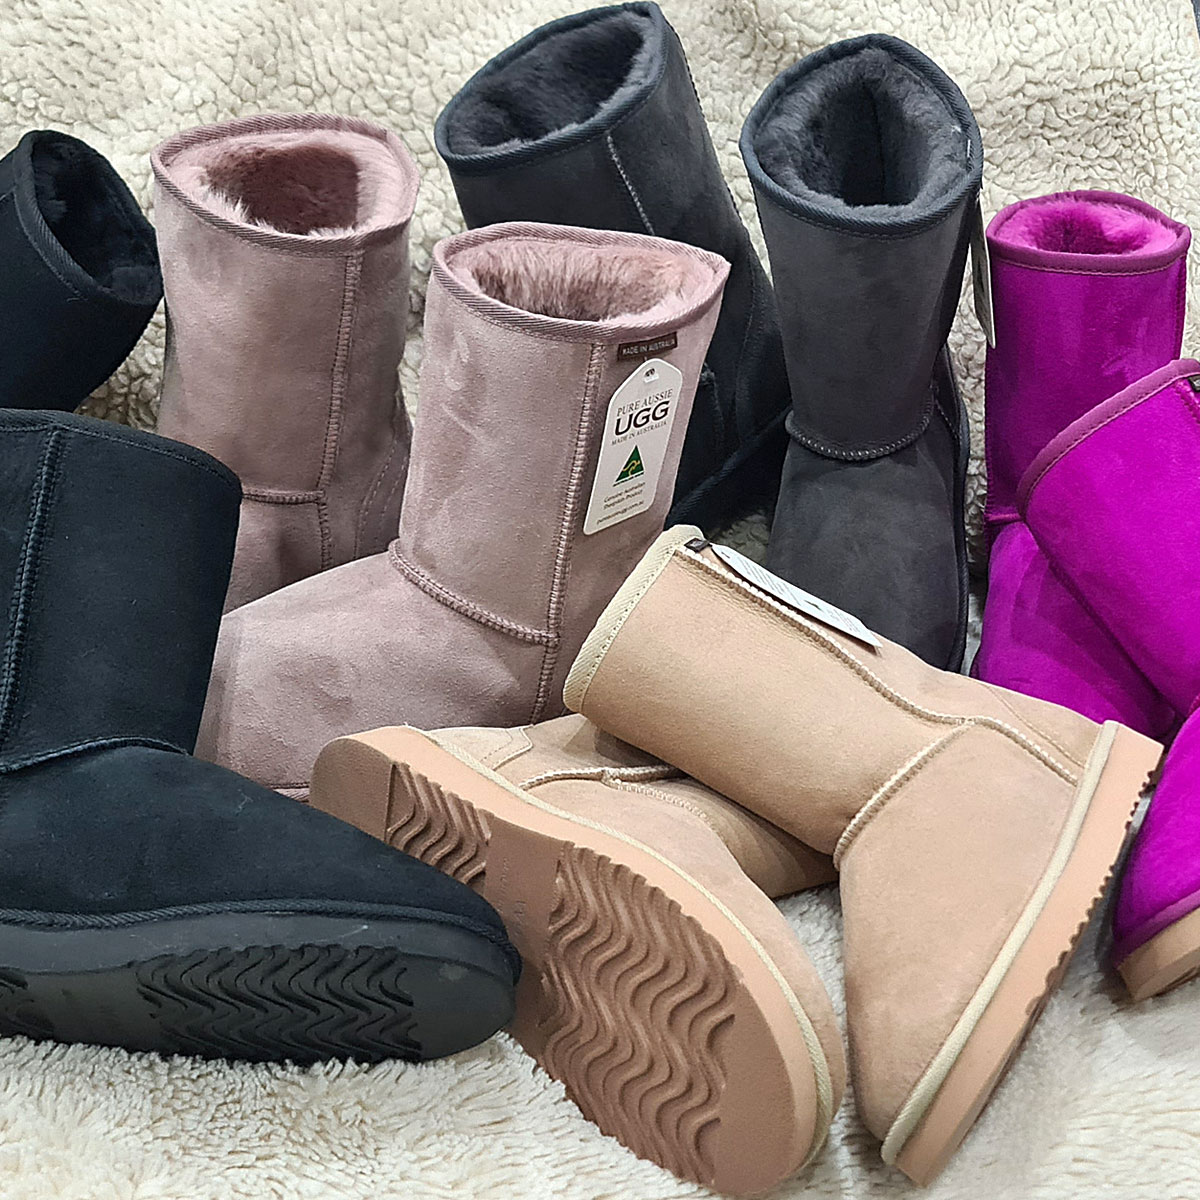 Colourful World of Ugg Boots